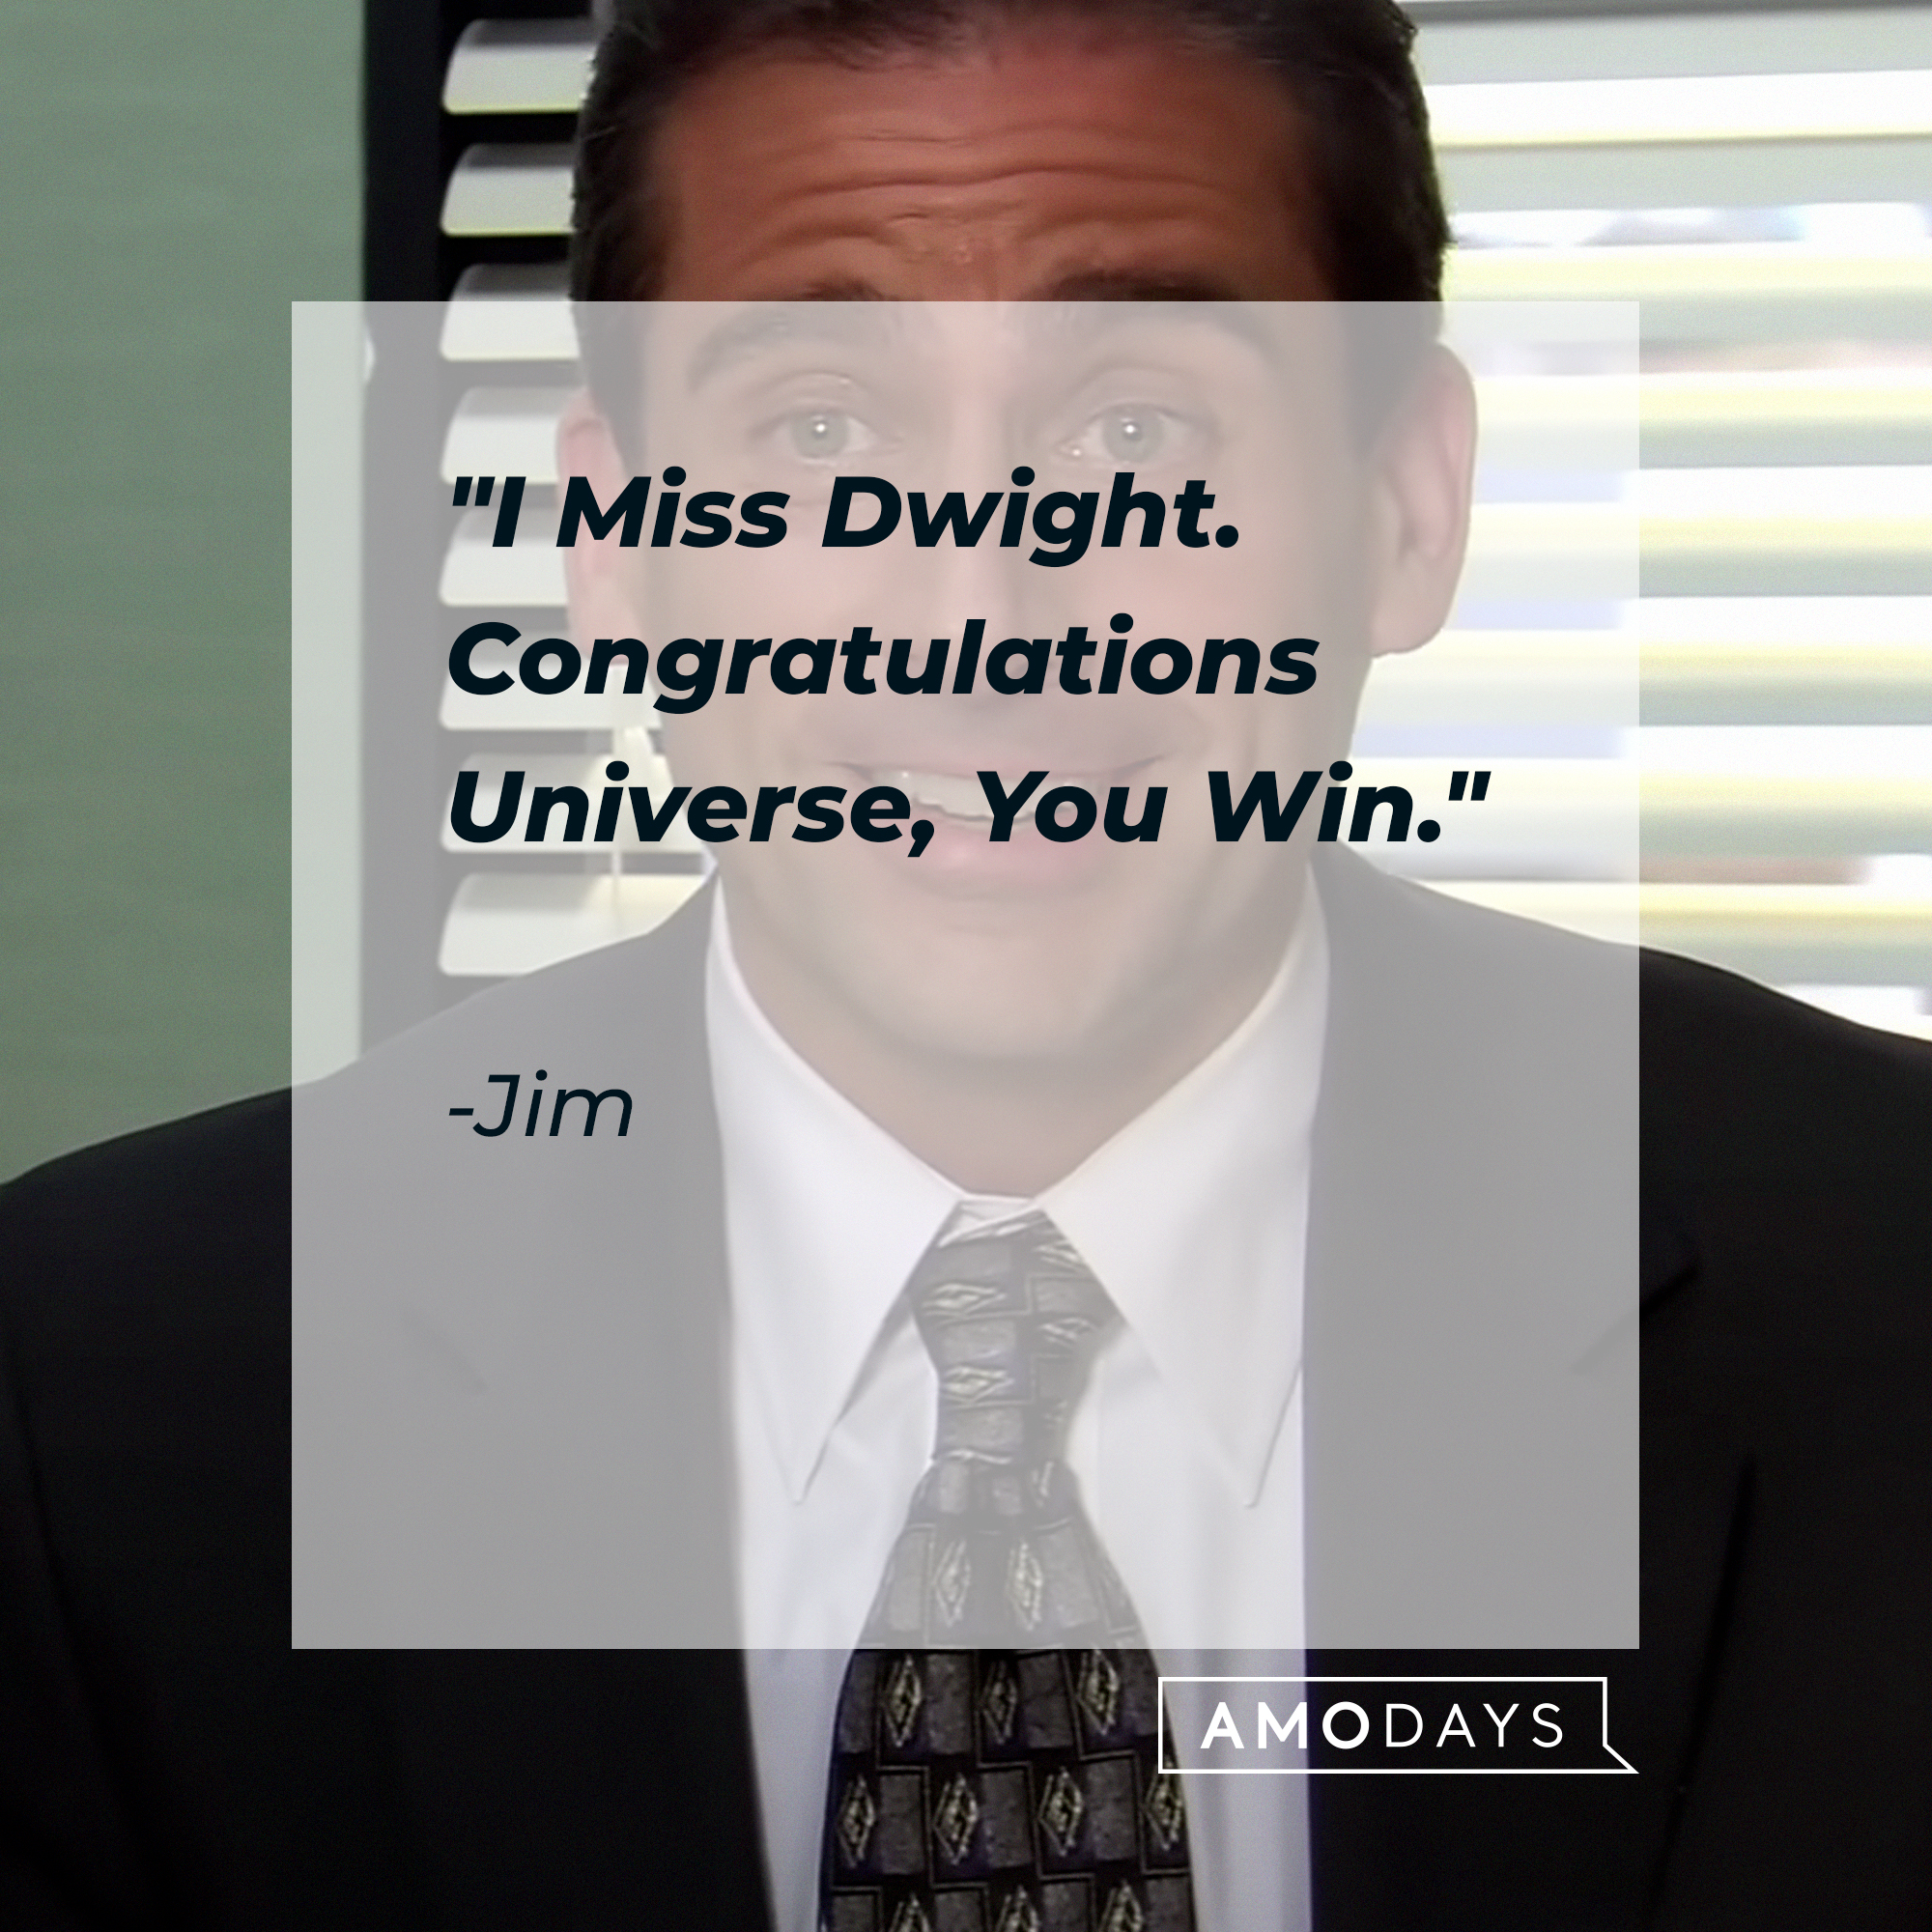 Jim's quote: "I miss Dwight. Congratulations Universe, You Win" | Source: Youtube.com/TheOffice